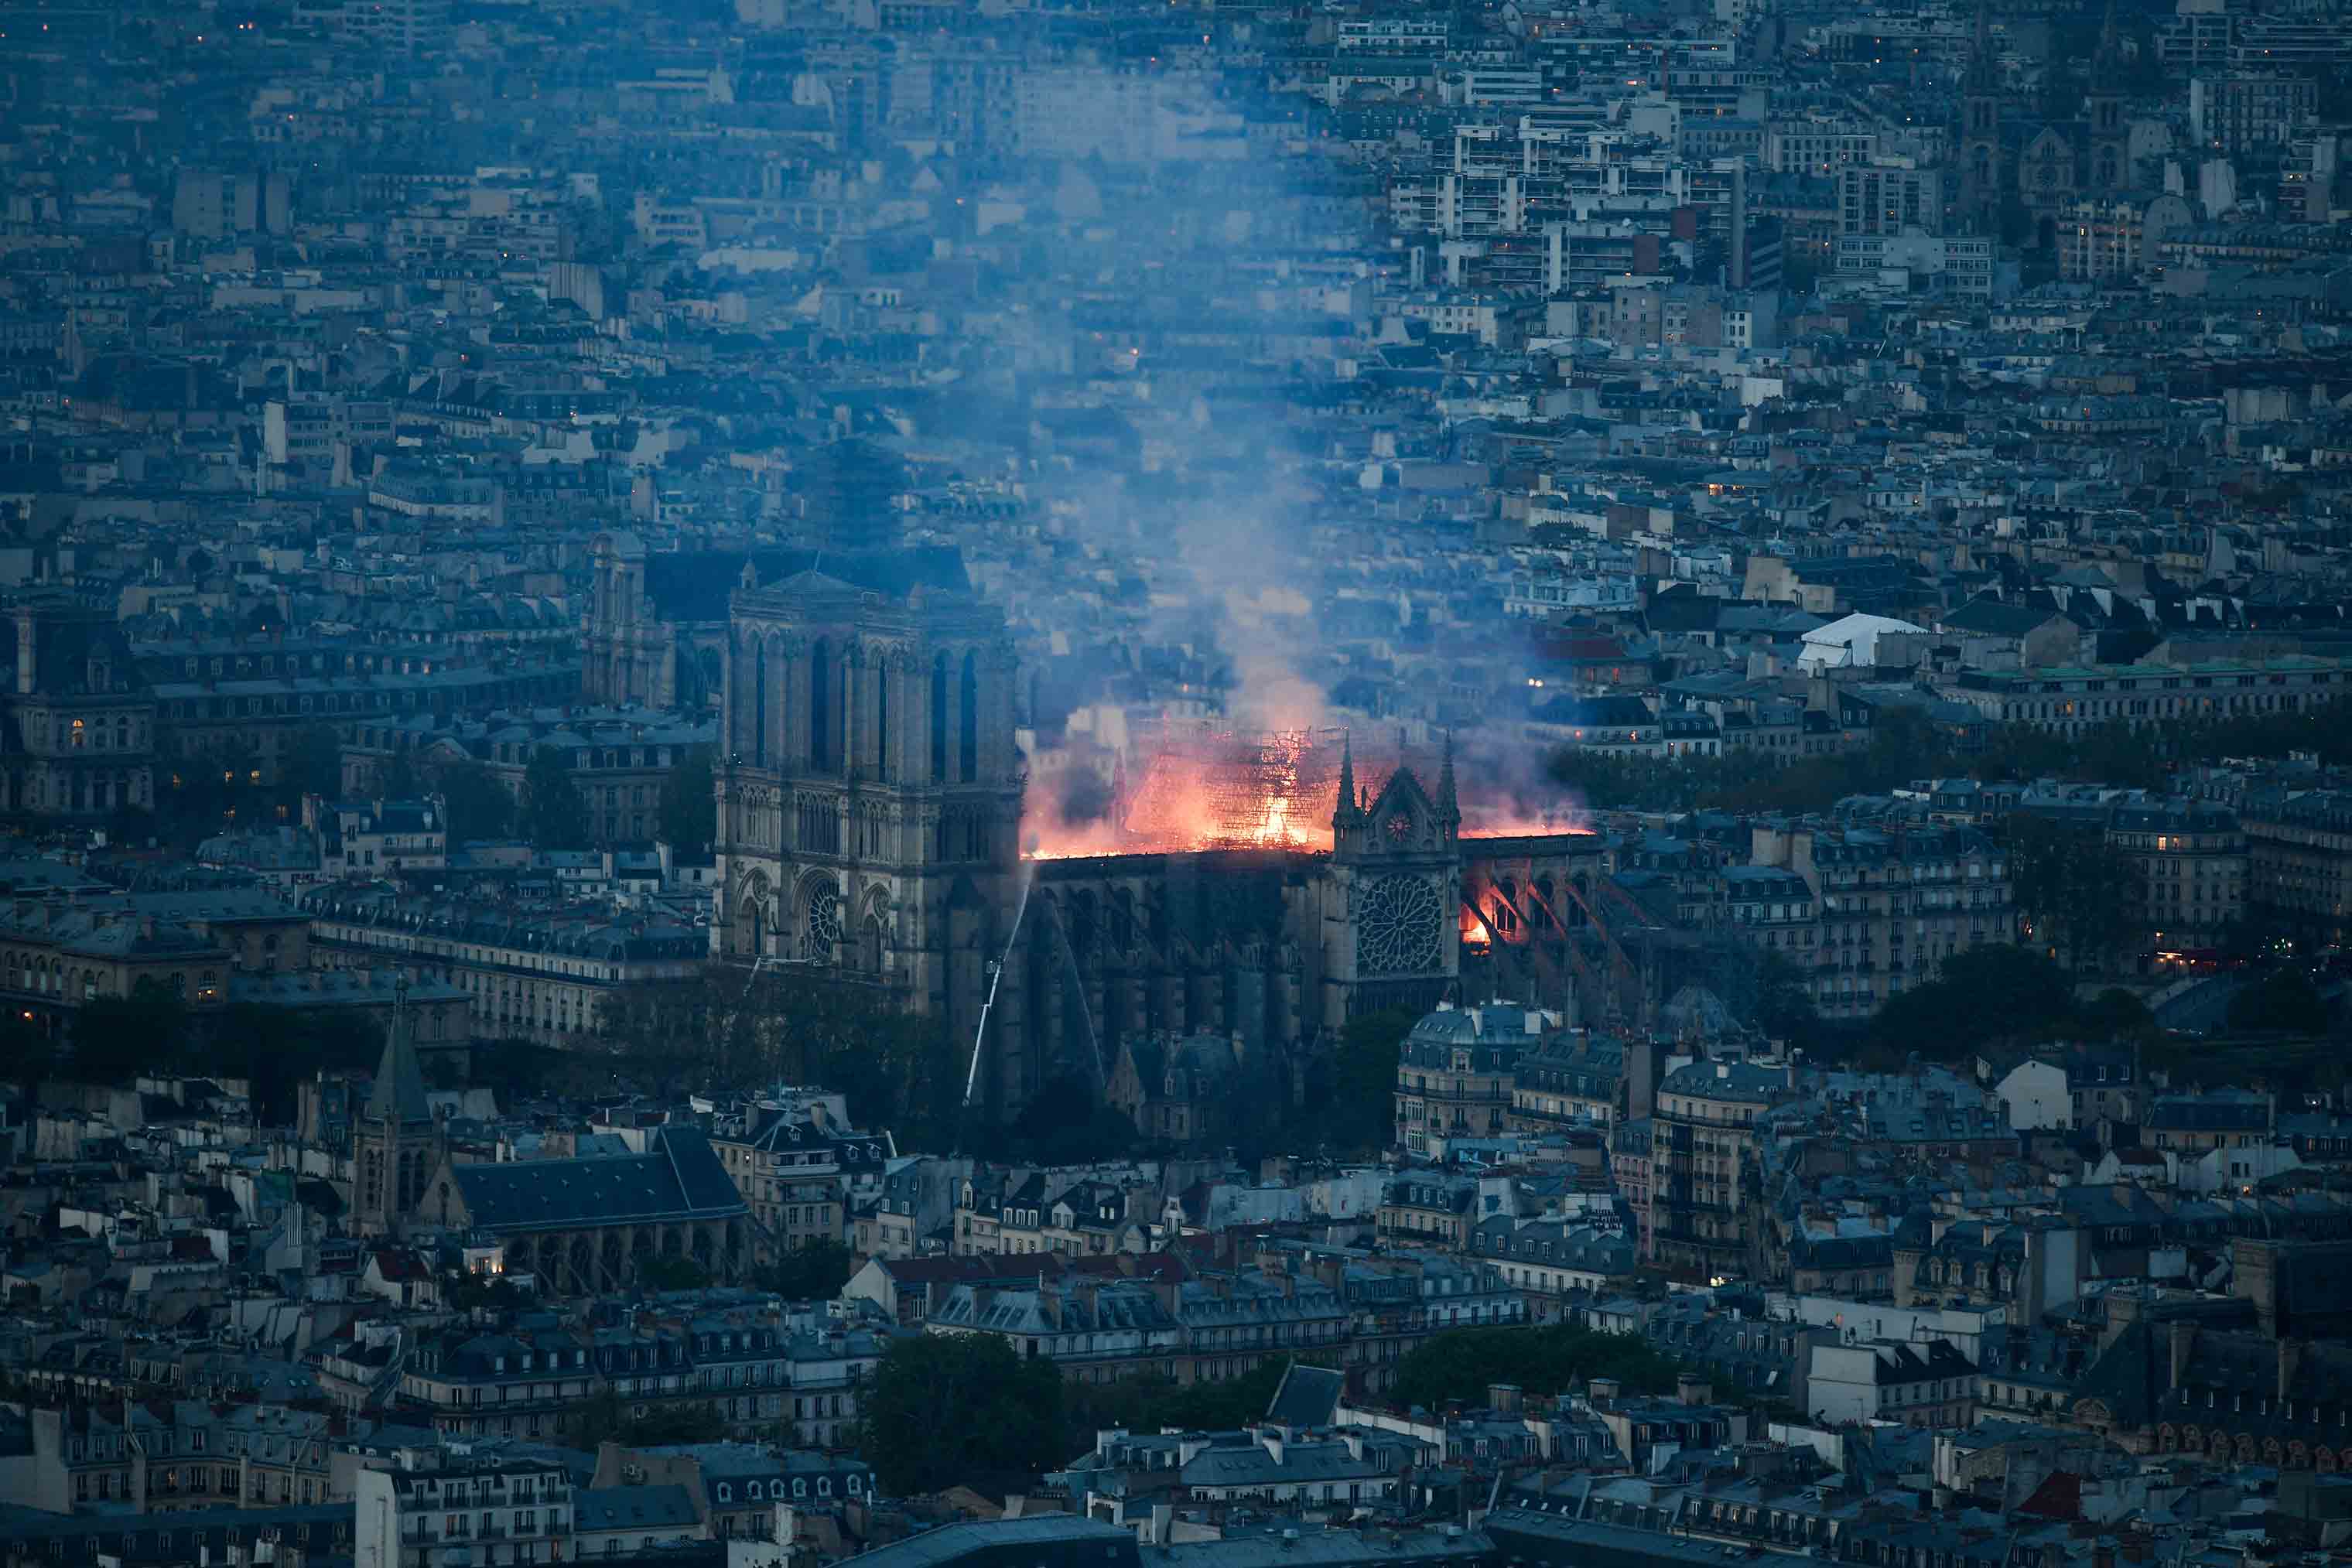 Smoke and flames rise during a fire at the landmark Notre-Dame Cathedral in central Paris on April 15, 2019. (Stephane Rochon Vollet—Abaca/SIPA)